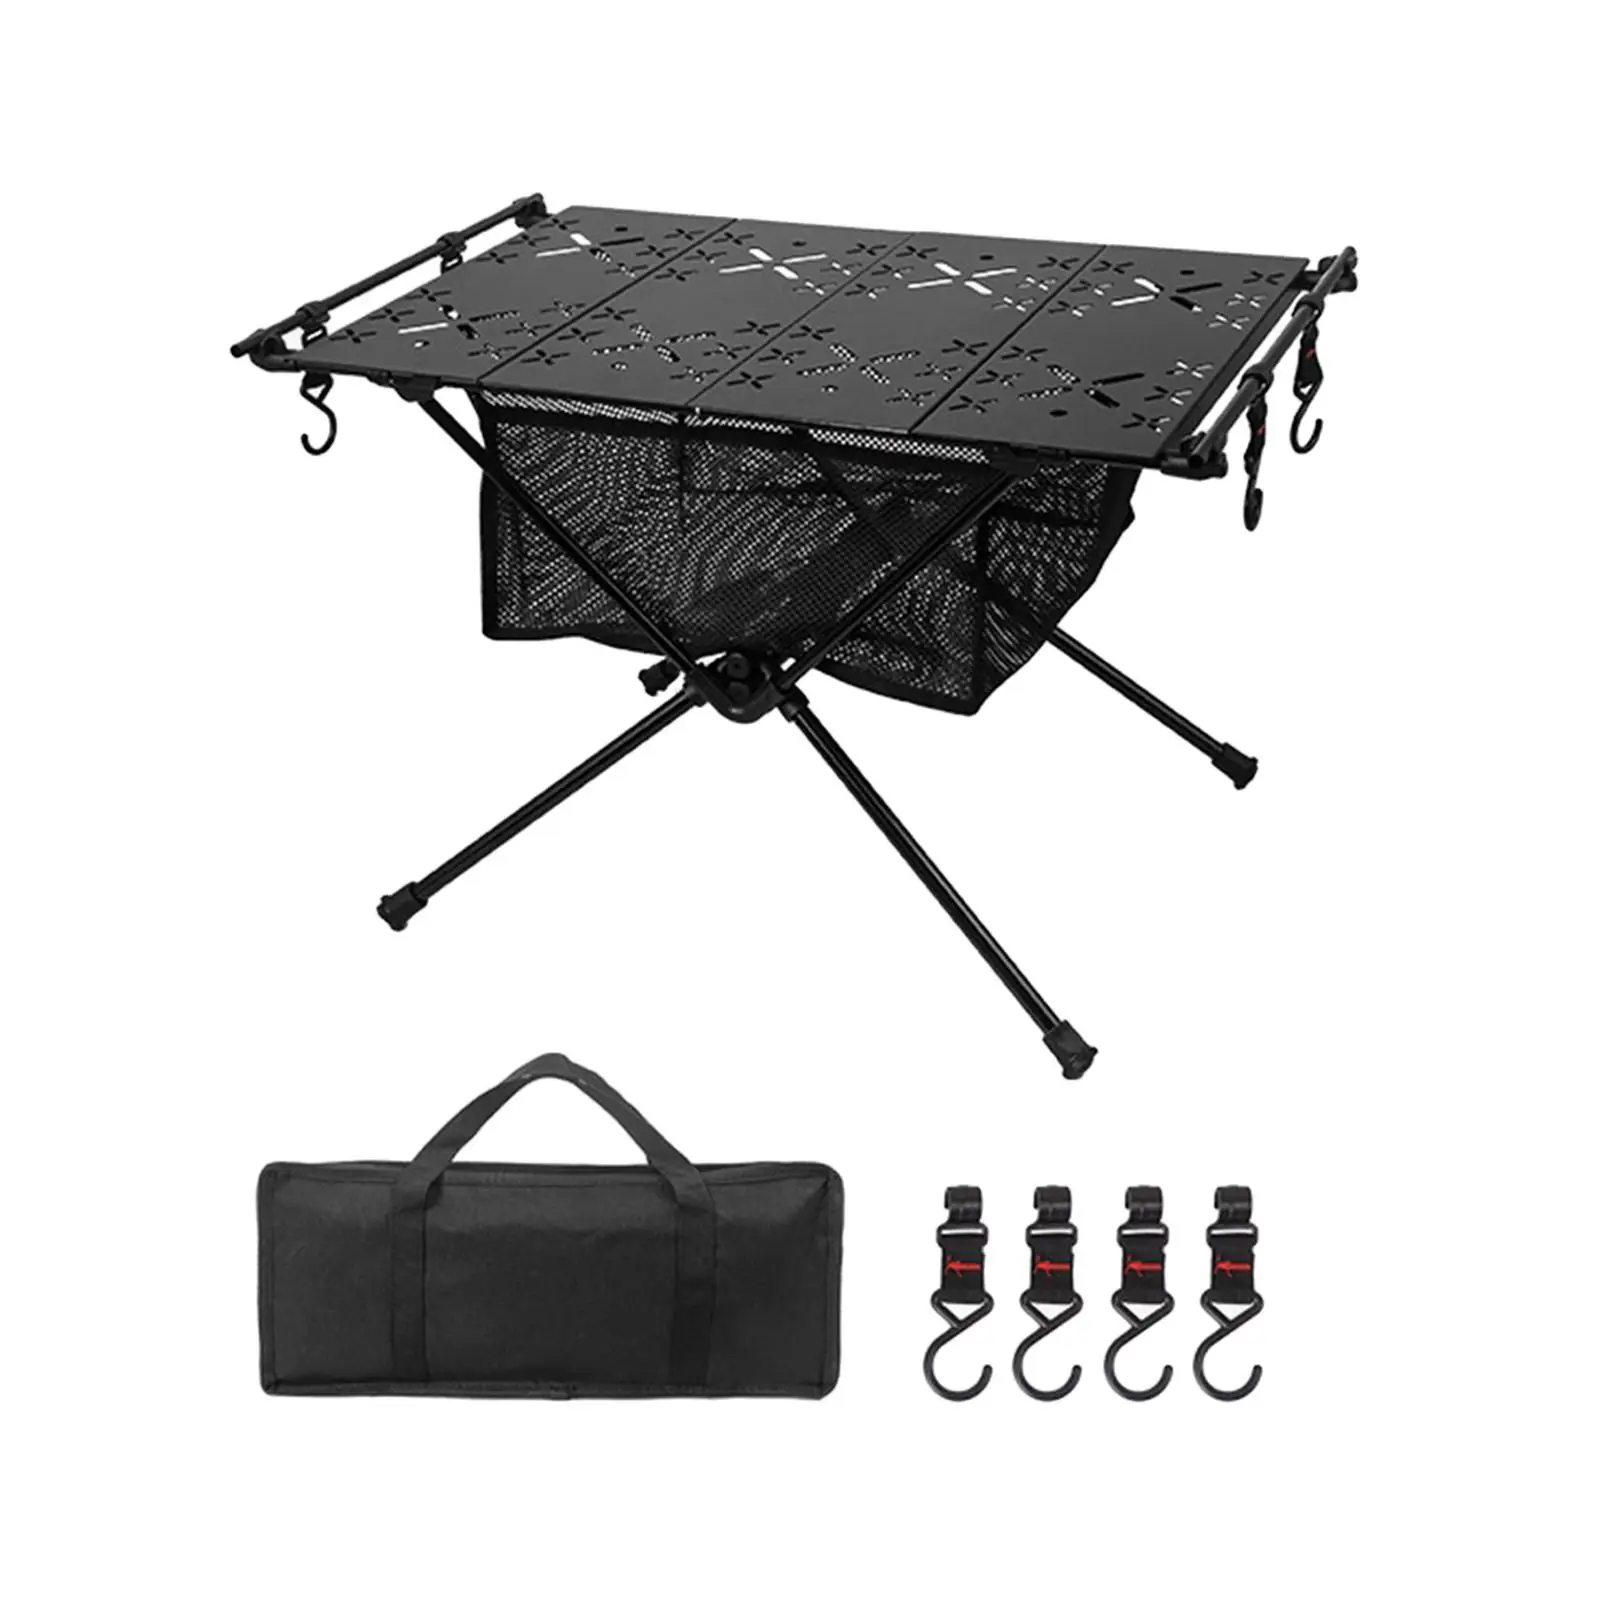 Foldable Camping Table Aluminum Alloy Camp Table Portable Desk Outdoor Foldable Table for Garden Picnic Travel Backpacking